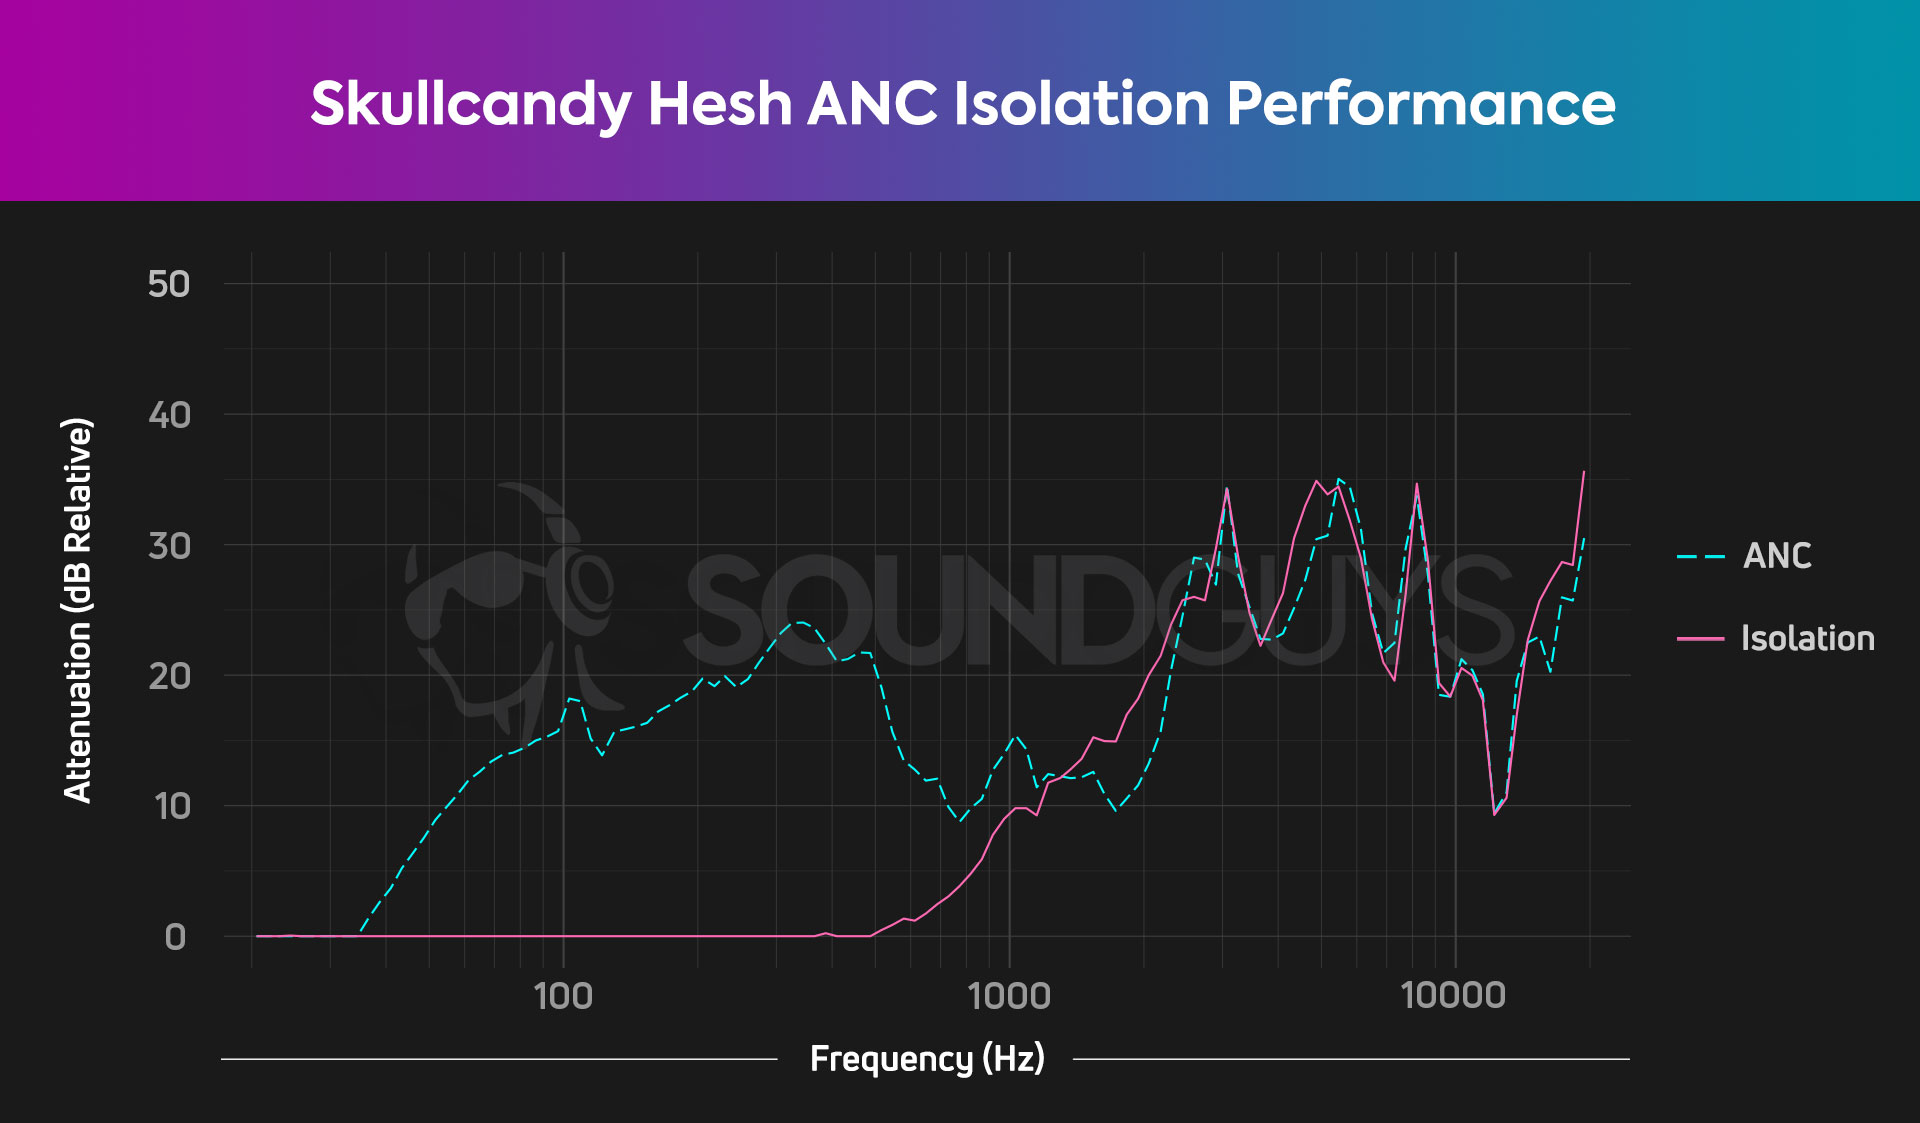 The Skullcandy Hesh ANC isolation performance chart shows that the ANC renders midrange frequencies one-fourth their original perceived loudness.